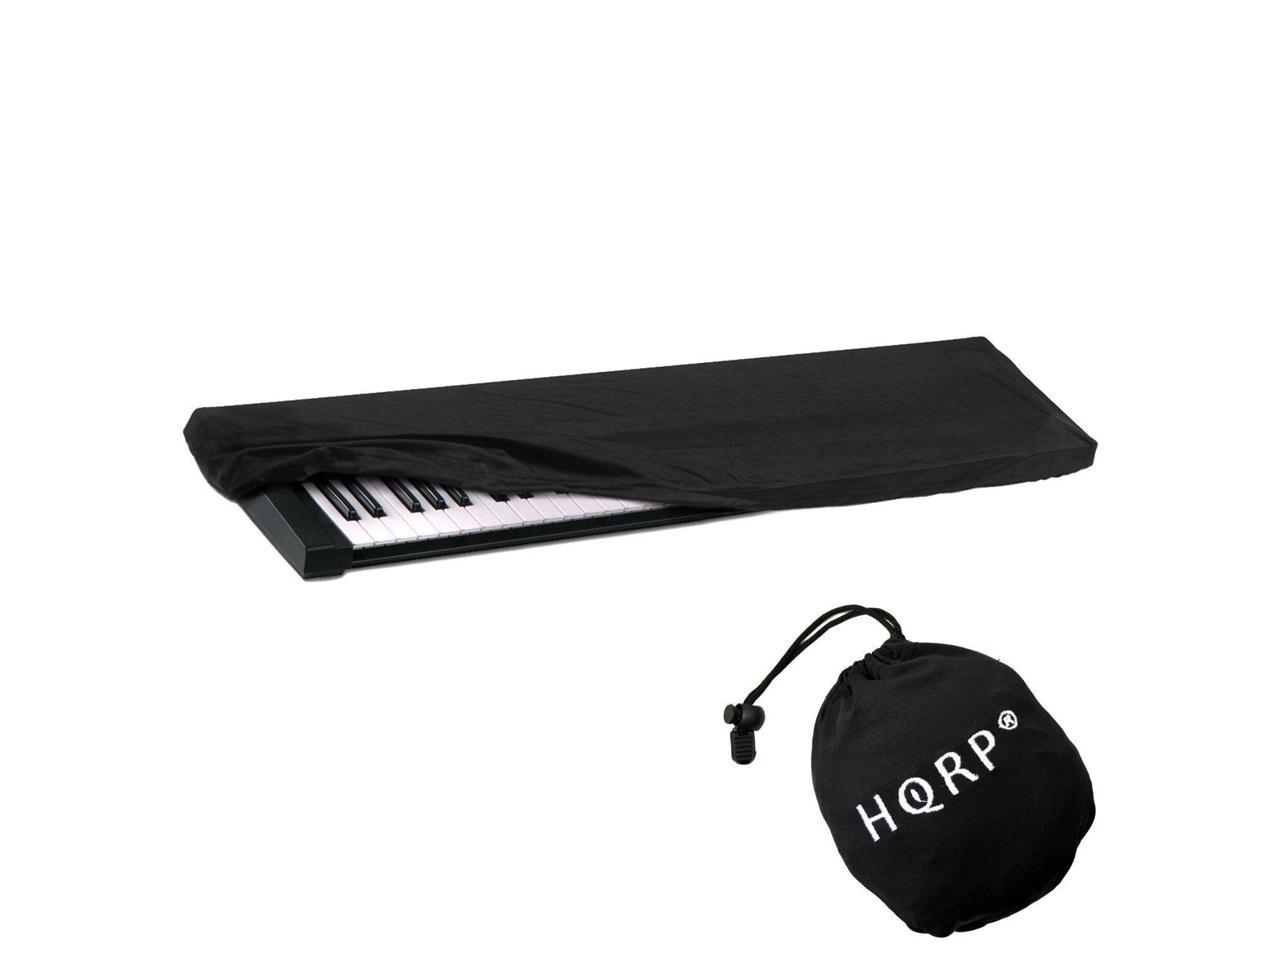 HQRP Keyboard Dust Cover for Roland BK-9 FP-50 FP-80 Jupiter-50 Jupiter-80 RD-800 RD-300NX Digital Piano Synthesizer HQRP Coaster 